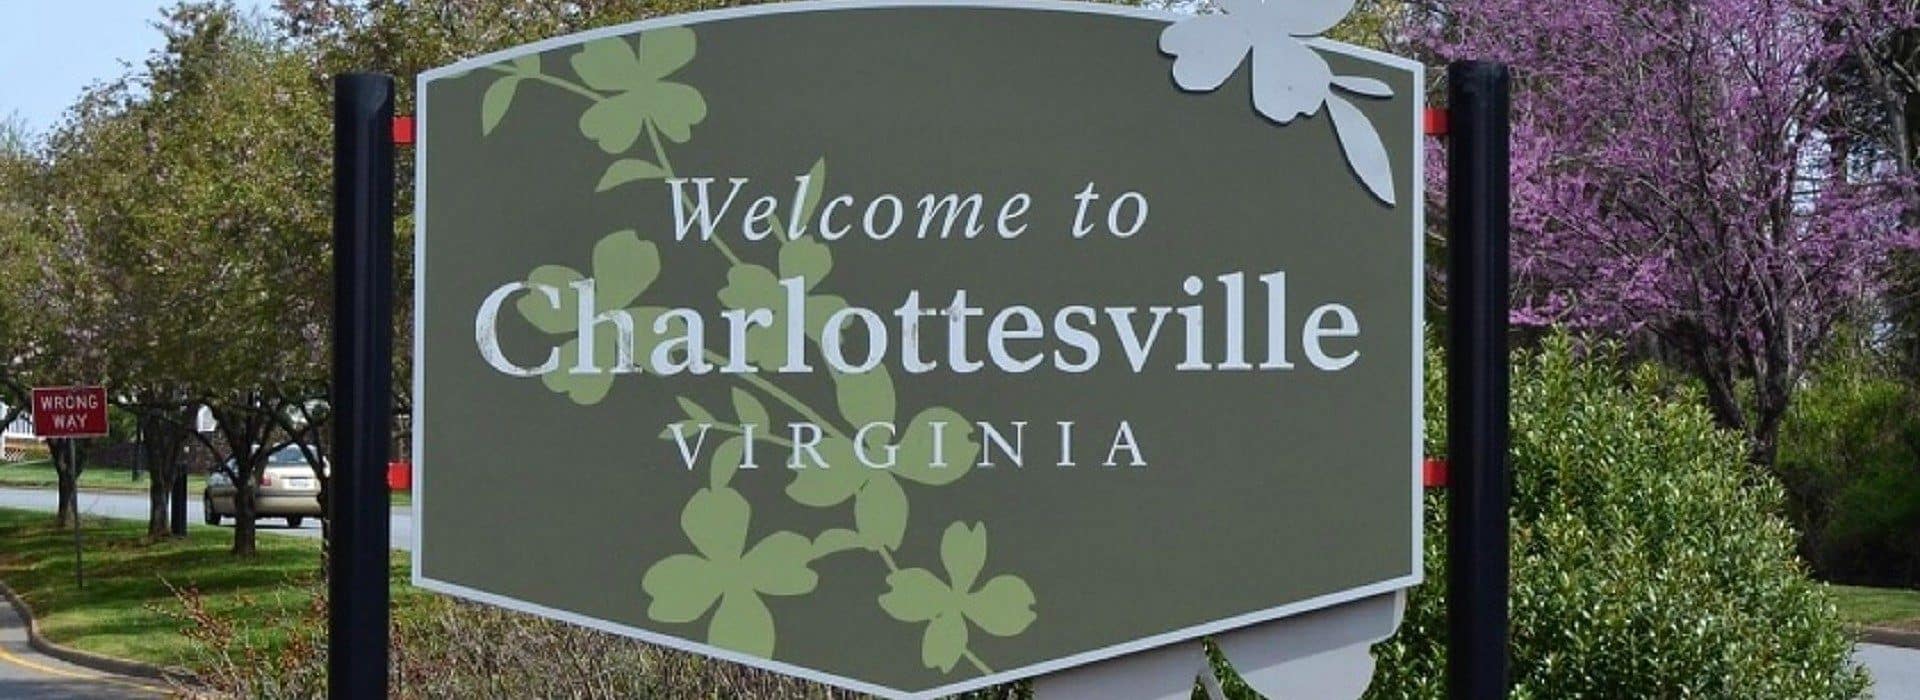 A large green sign on black posts welcoming visitors to a city